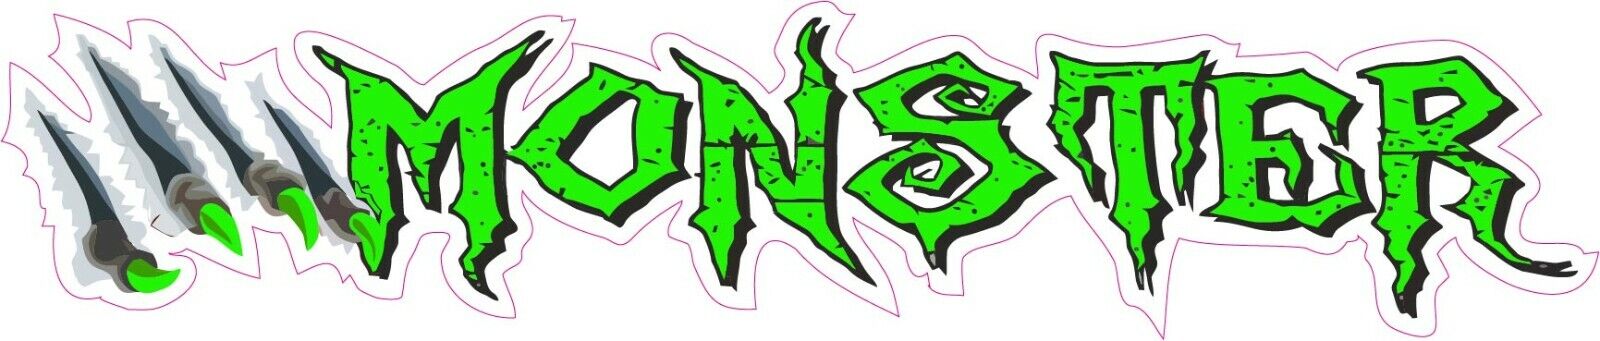 Monster Claws Green Large Decal 12\